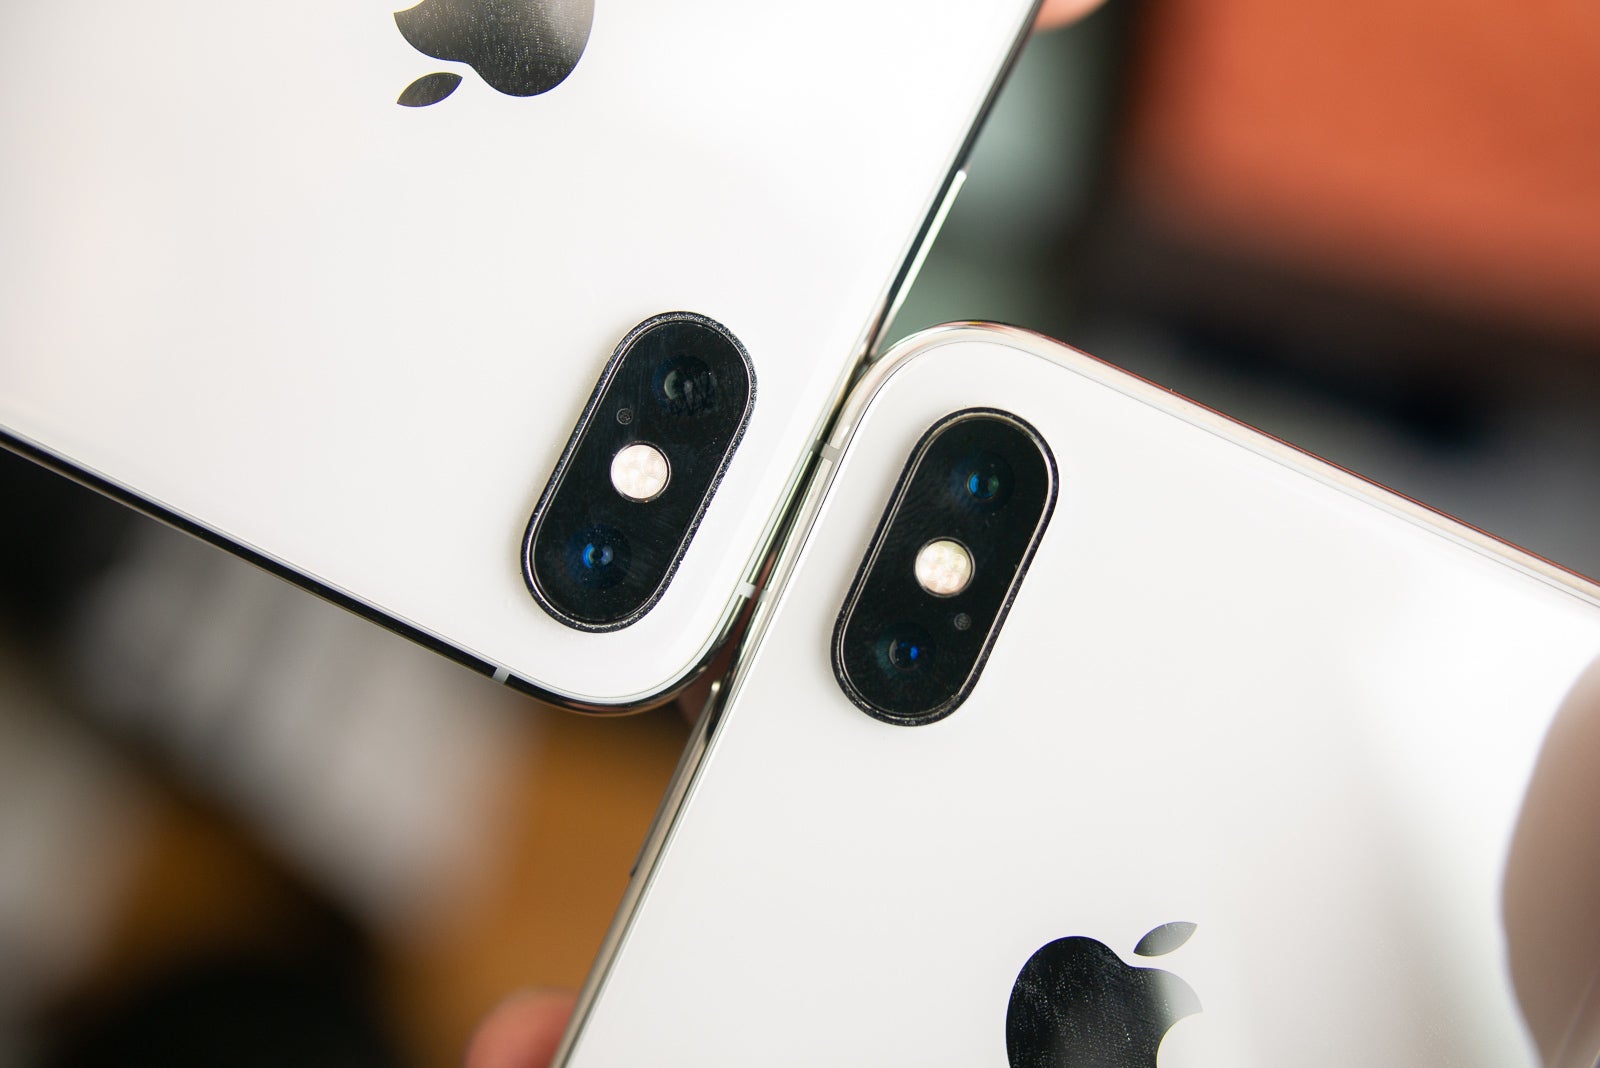 The iPhone 11's release date may have been accidentally revealed